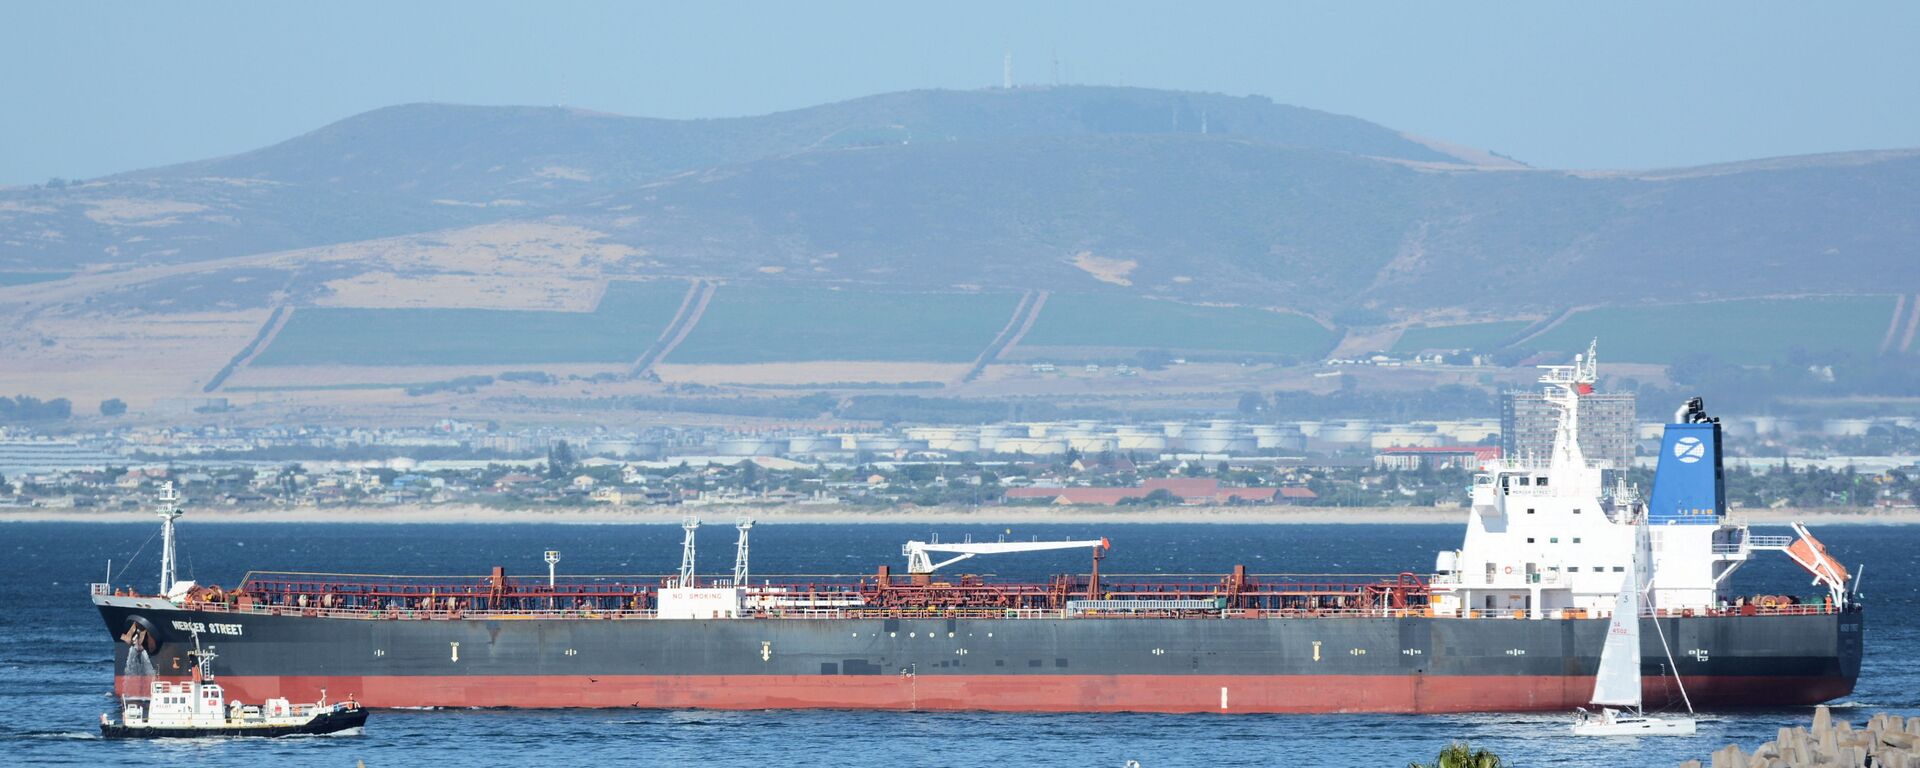 The Mercer Street, a Japanese-owned Liberian-flagged tanker managed by Israeli-owned Zodiac Maritime that was attacked off Oman coast as seen in Cape Town, South Africa, January 2, 2016 in this picture obtained from ship tracker website, MarineTraffic.com. Picture taken January 2, 2016.  Johan Victor/Handout via REUTERS THIS IMAGE HAS BEEN SUPPLIED BY A THIRD PARTY. MANDATORY CREDIT. NO RESALES. NO ARCHIVES. - Sputnik International, 1920, 03.08.2021